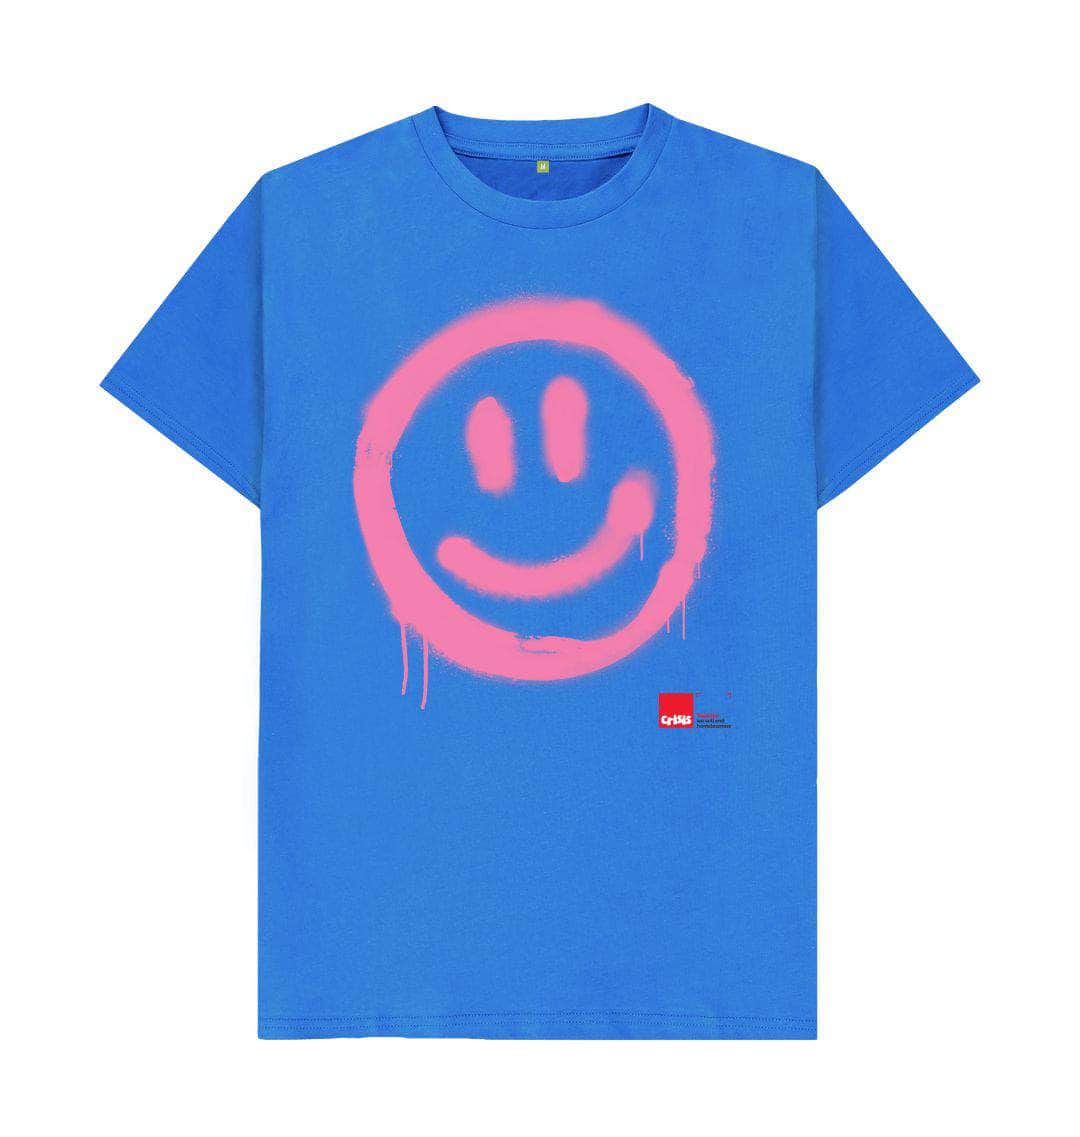 Bright Blue Smiley Face T-shirt